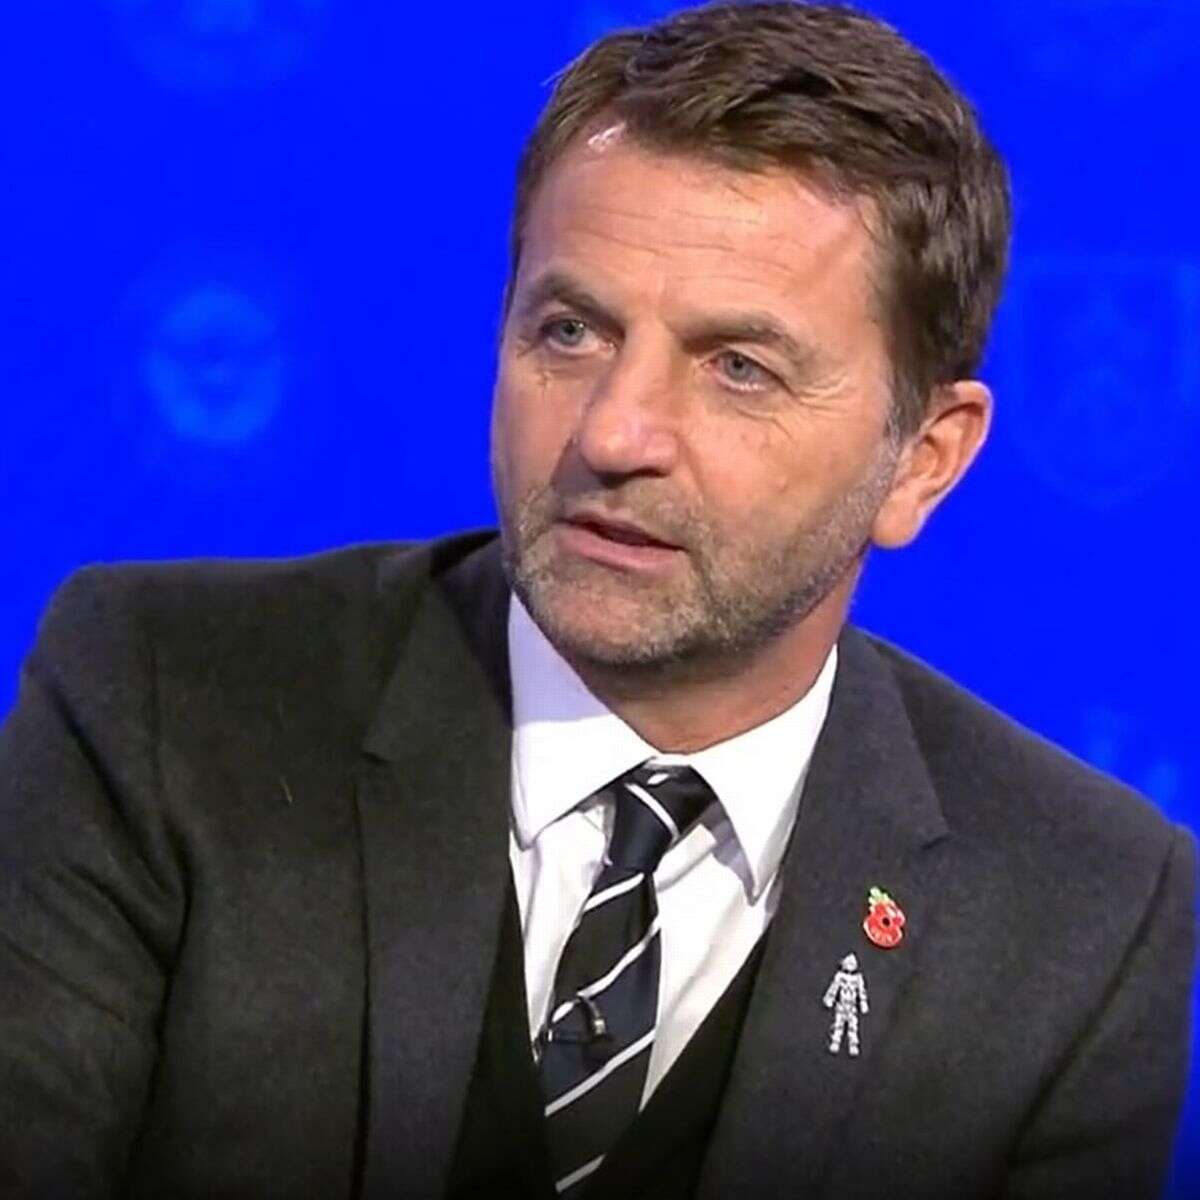 It’s unacceptable, shut your mouth – Sherwood slams Man Utd coach over treatment of players